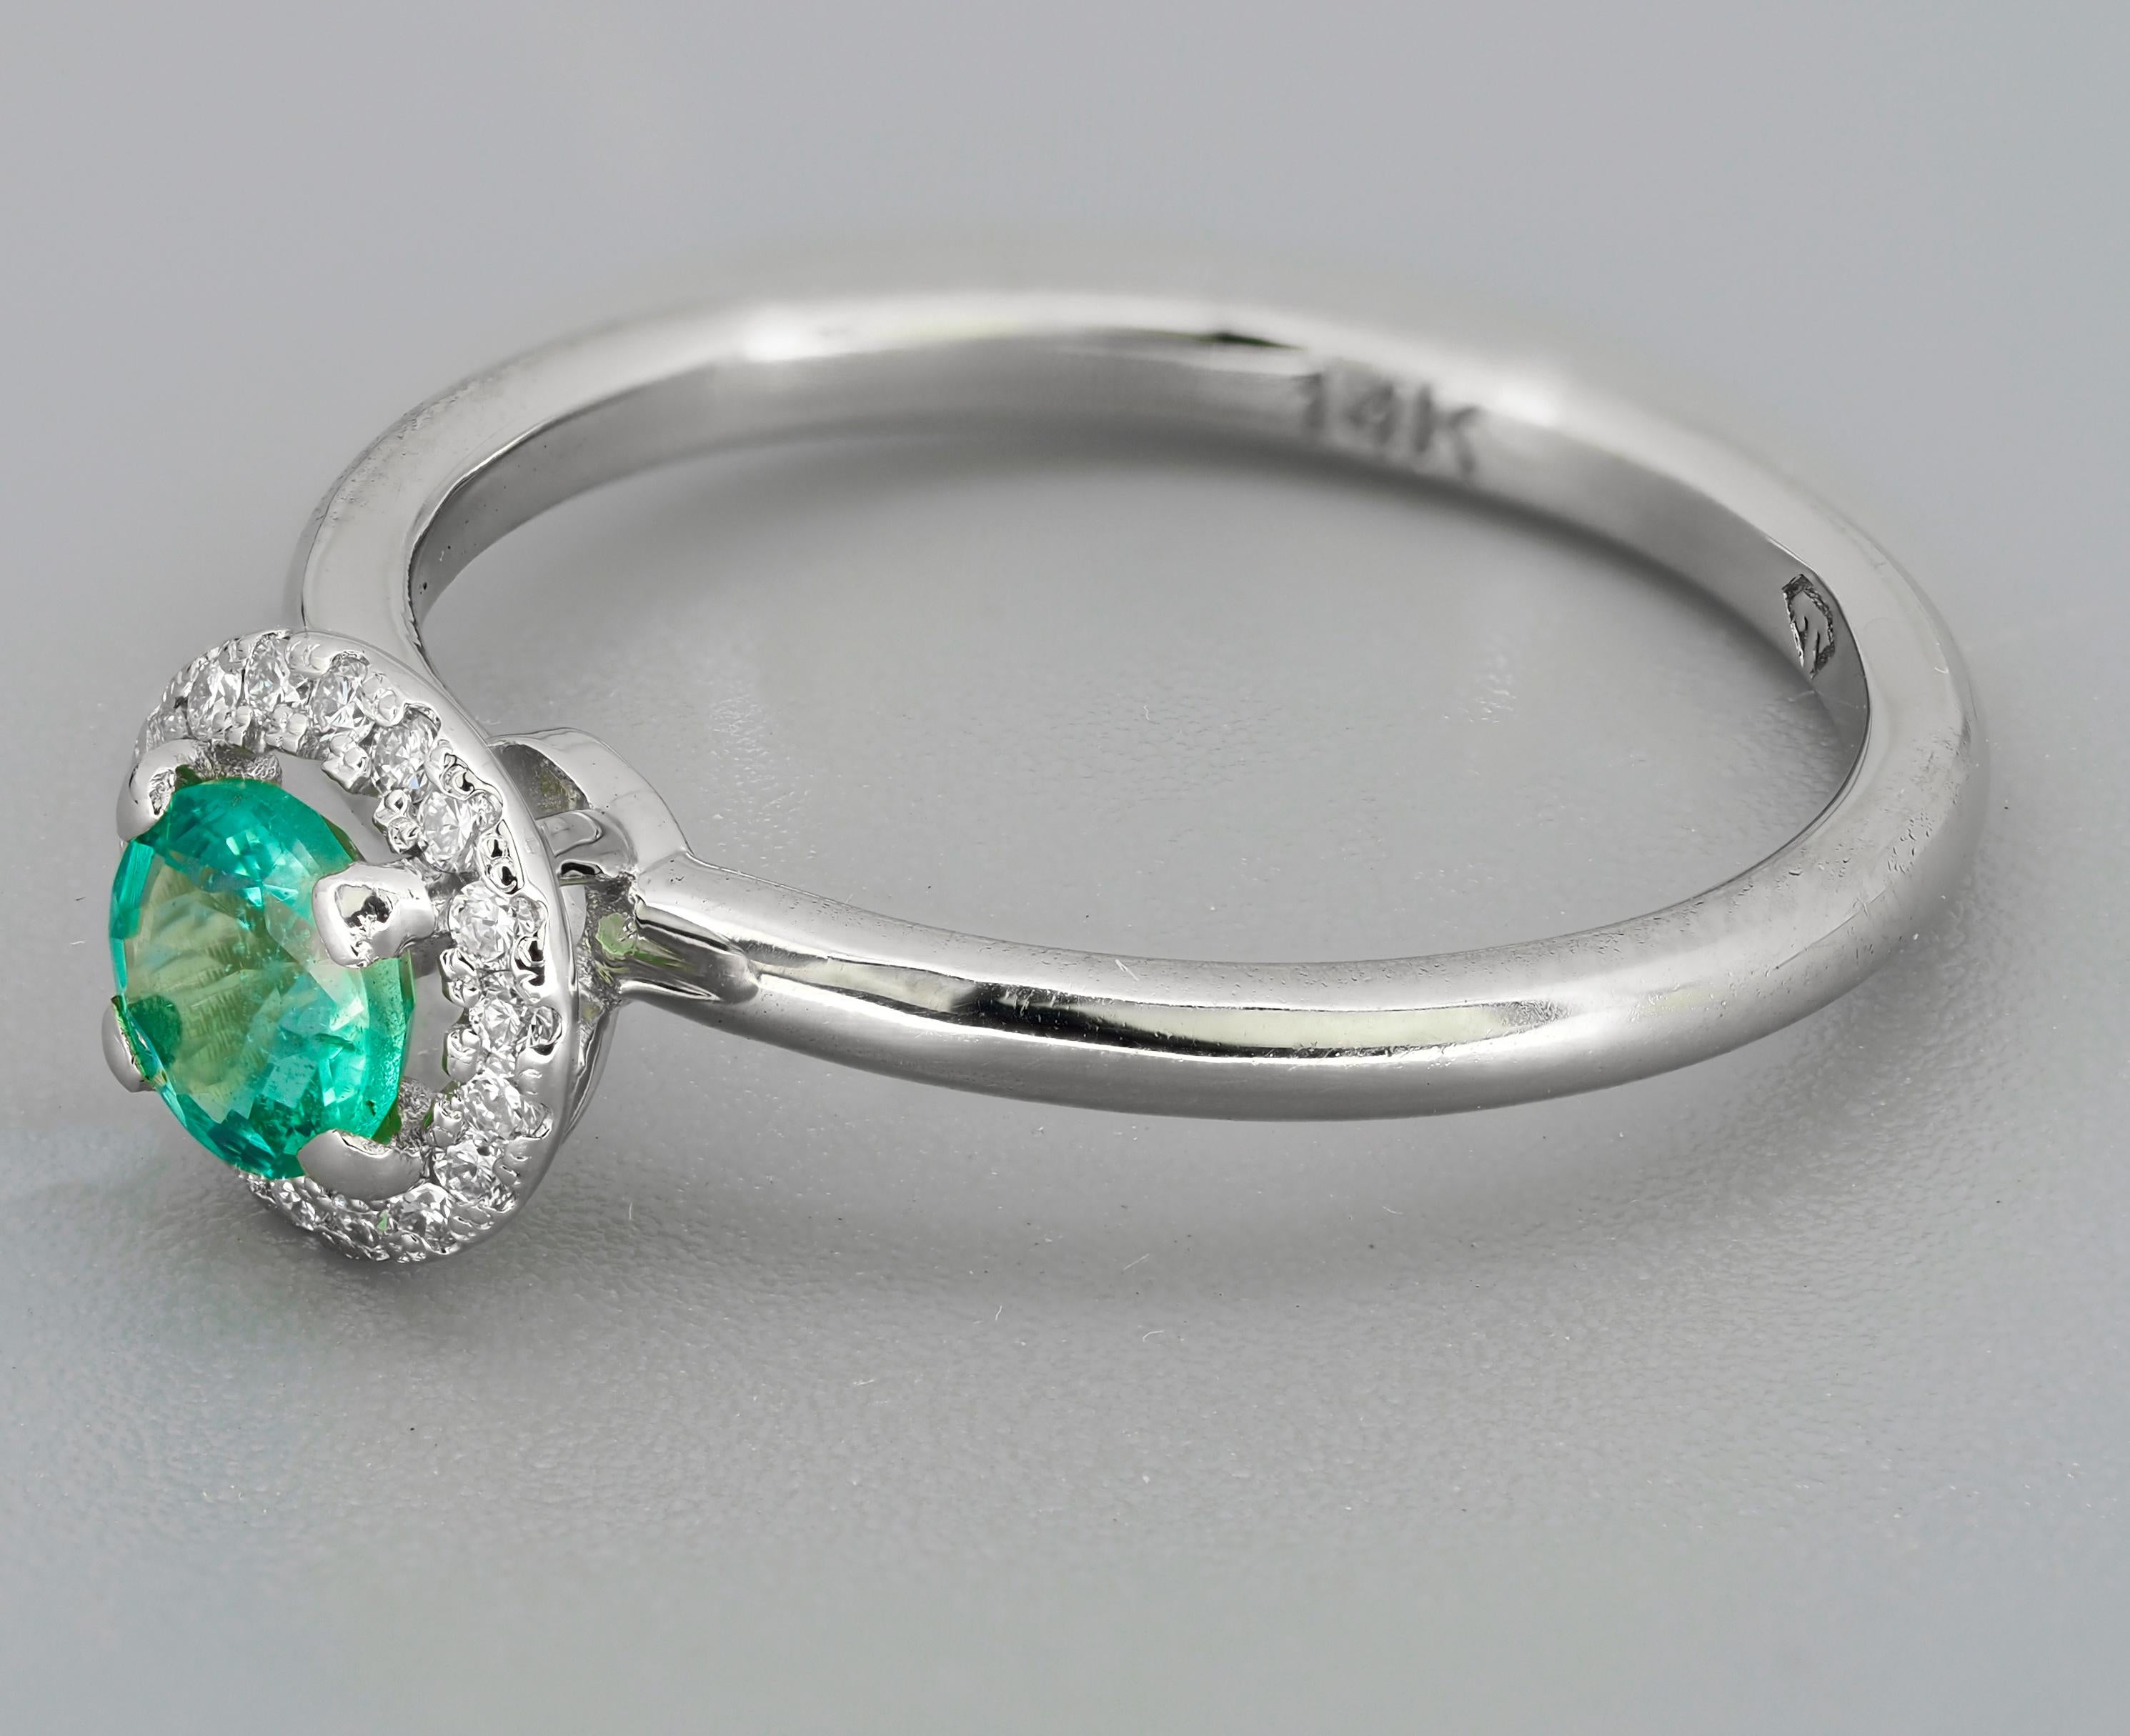 14k Gold Ring with Emerald and Diamonds, Emerald Halo Ring 2